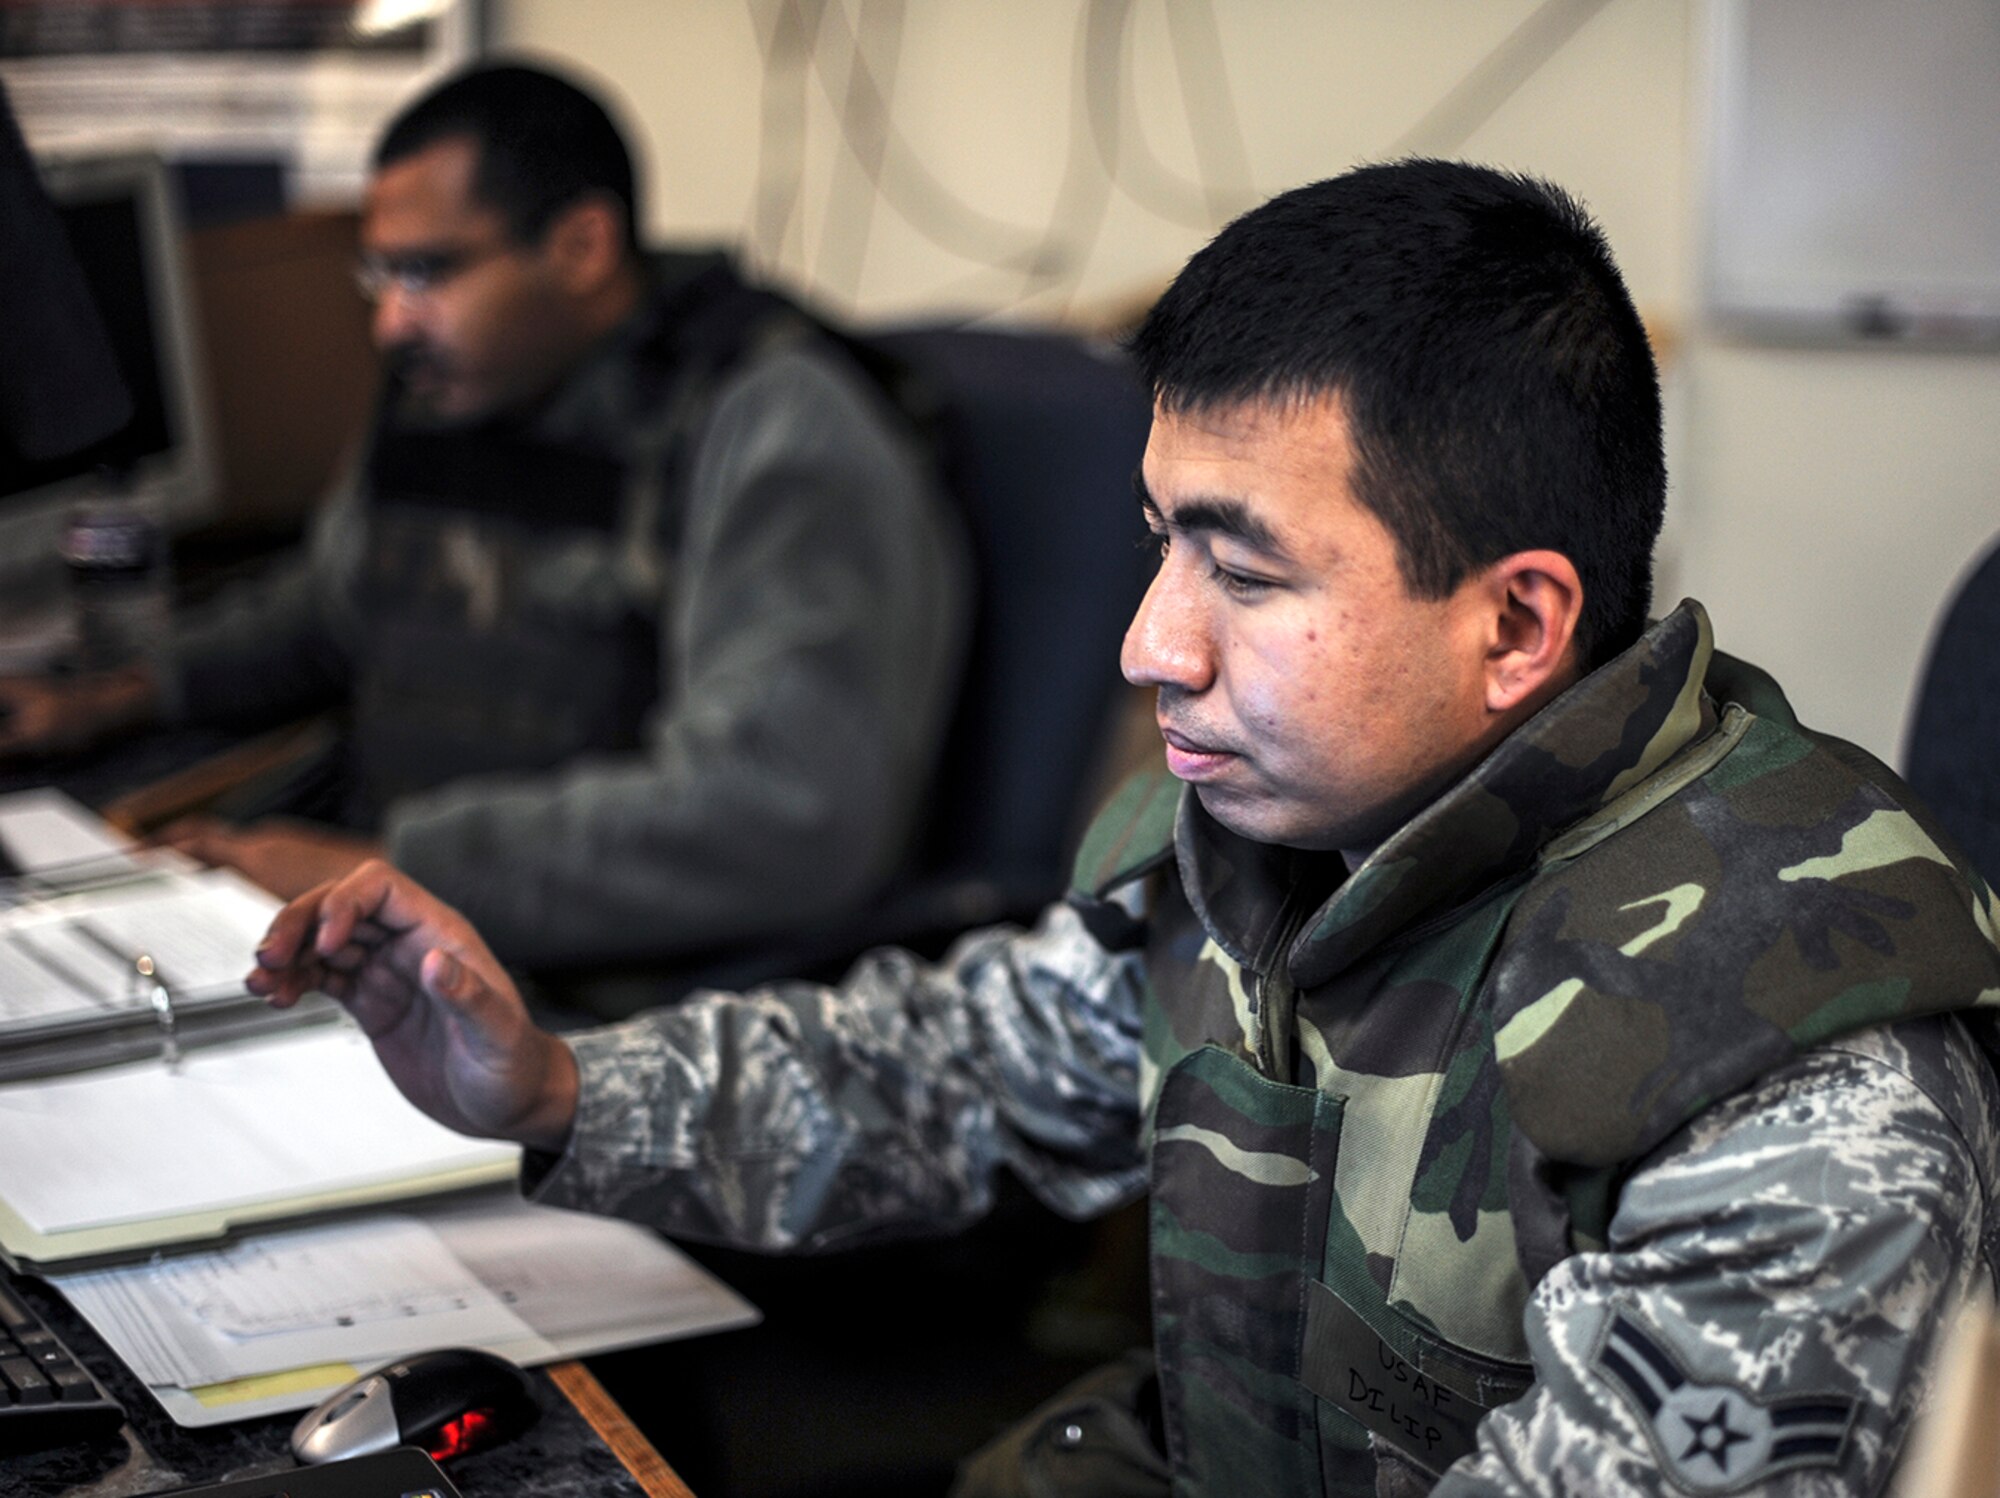 Air Force Airmen 1st Class Ryan Potter (left) and Dilip Pradhan, exercise unit control center operators ‘deployed’ from the 366th Comptroller Squadron, update information on an automated exercise information system during a readiness exercise at Mountain Home Air Force Base, Idaho, Dec. 17, 2013.  The comptrollers worked in conjuction with Airmen from contracting, the chapel, safety, the judge advocate office and public affairs during the exercise. (U.S. Air Force photo by Master Sgt. Kevin Wallace/RELEASED)